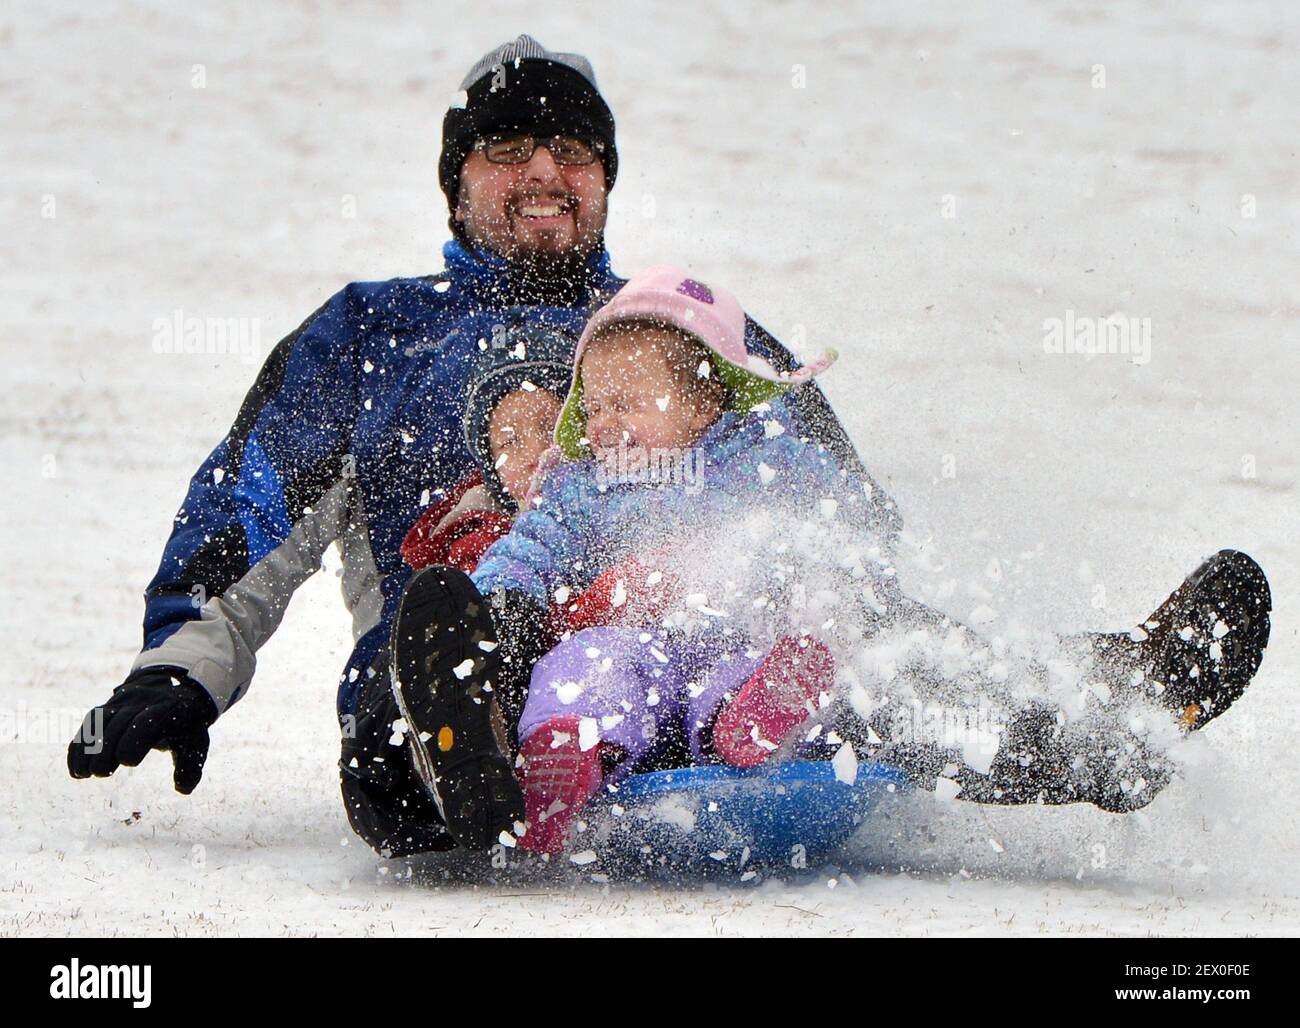 Hussein Genk, left, gets a fateful of snow as he flies down a hill on a sled with his children Kareena, 2, front, and Ayyub, 4, on Tuesday, Feb. 17, 2015 in Durham, N.C. A winter storm that made it's way across the region Monday night made roads and sidewalks hazardous. (Photo by Chuck Liddy/News & Observer/TNS) *** Please Use Credit from Credit Field *** Stock Photo